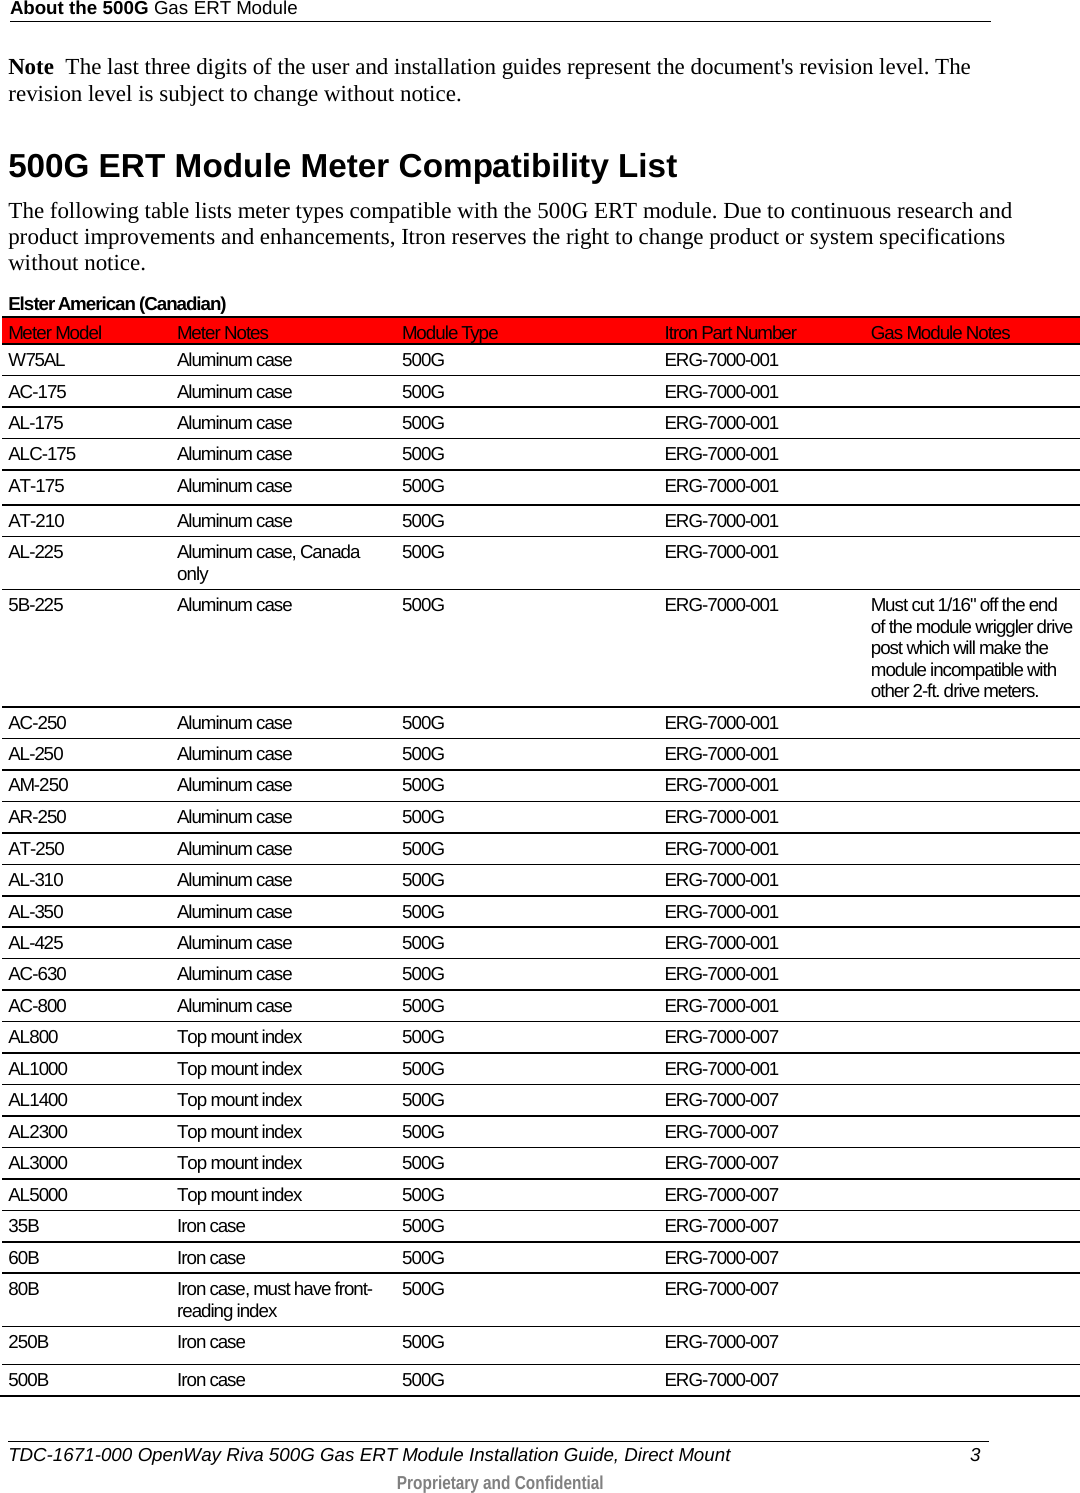 About the 500G Gas ERT Module  Note  The last three digits of the user and installation guides represent the document&apos;s revision level. The revision level is subject to change without notice.  500G ERT Module Meter Compatibility List The following table lists meter types compatible with the 500G ERT module. Due to continuous research and product improvements and enhancements, Itron reserves the right to change product or system specifications without notice.  Elster American (Canadian) Meter Model Meter Notes Module Type Itron Part Number Gas Module Notes W75AL Aluminum case 500G ERG-7000-001   AC-175 Aluminum case  500G ERG-7000-001   AL-175 Aluminum case 500G ERG-7000-001   ALC-175 Aluminum case 500G ERG-7000-001   AT-175 Aluminum case 500G ERG-7000-001   AT-210 Aluminum case  500G ERG-7000-001   AL-225 Aluminum case, Canada only 500G ERG-7000-001   5B-225 Aluminum case 500G ERG-7000-001 Must cut 1/16&quot; off the end of the module wriggler drive post which will make the module incompatible with other 2-ft. drive meters. AC-250  Aluminum case 500G ERG-7000-001   AL-250 Aluminum case 500G ERG-7000-001   AM-250 Aluminum case 500G ERG-7000-001   AR-250 Aluminum case 500G ERG-7000-001   AT-250 Aluminum case 500G ERG-7000-001   AL-310 Aluminum case 500G ERG-7000-001   AL-350 Aluminum case 500G ERG-7000-001   AL-425 Aluminum case 500G ERG-7000-001   AC-630 Aluminum case 500G ERG-7000-001   AC-800 Aluminum case 500G ERG-7000-001   AL800 Top mount index 500G ERG-7000-007   AL1000 Top mount index 500G ERG-7000-001   AL1400 Top mount index 500G ERG-7000-007   AL2300 Top mount index 500G ERG-7000-007   AL3000 Top mount index 500G ERG-7000-007   AL5000 Top mount index 500G ERG-7000-007   35B Iron case 500G ERG-7000-007   60B Iron case 500G ERG-7000-007   80B Iron case, must have front-reading index 500G ERG-7000-007   250B Iron case 500G ERG-7000-007   500B Iron case 500G ERG-7000-007   TDC-1671-000 OpenWay Riva 500G Gas ERT Module Installation Guide, Direct Mount  3   Proprietary and Confidential  